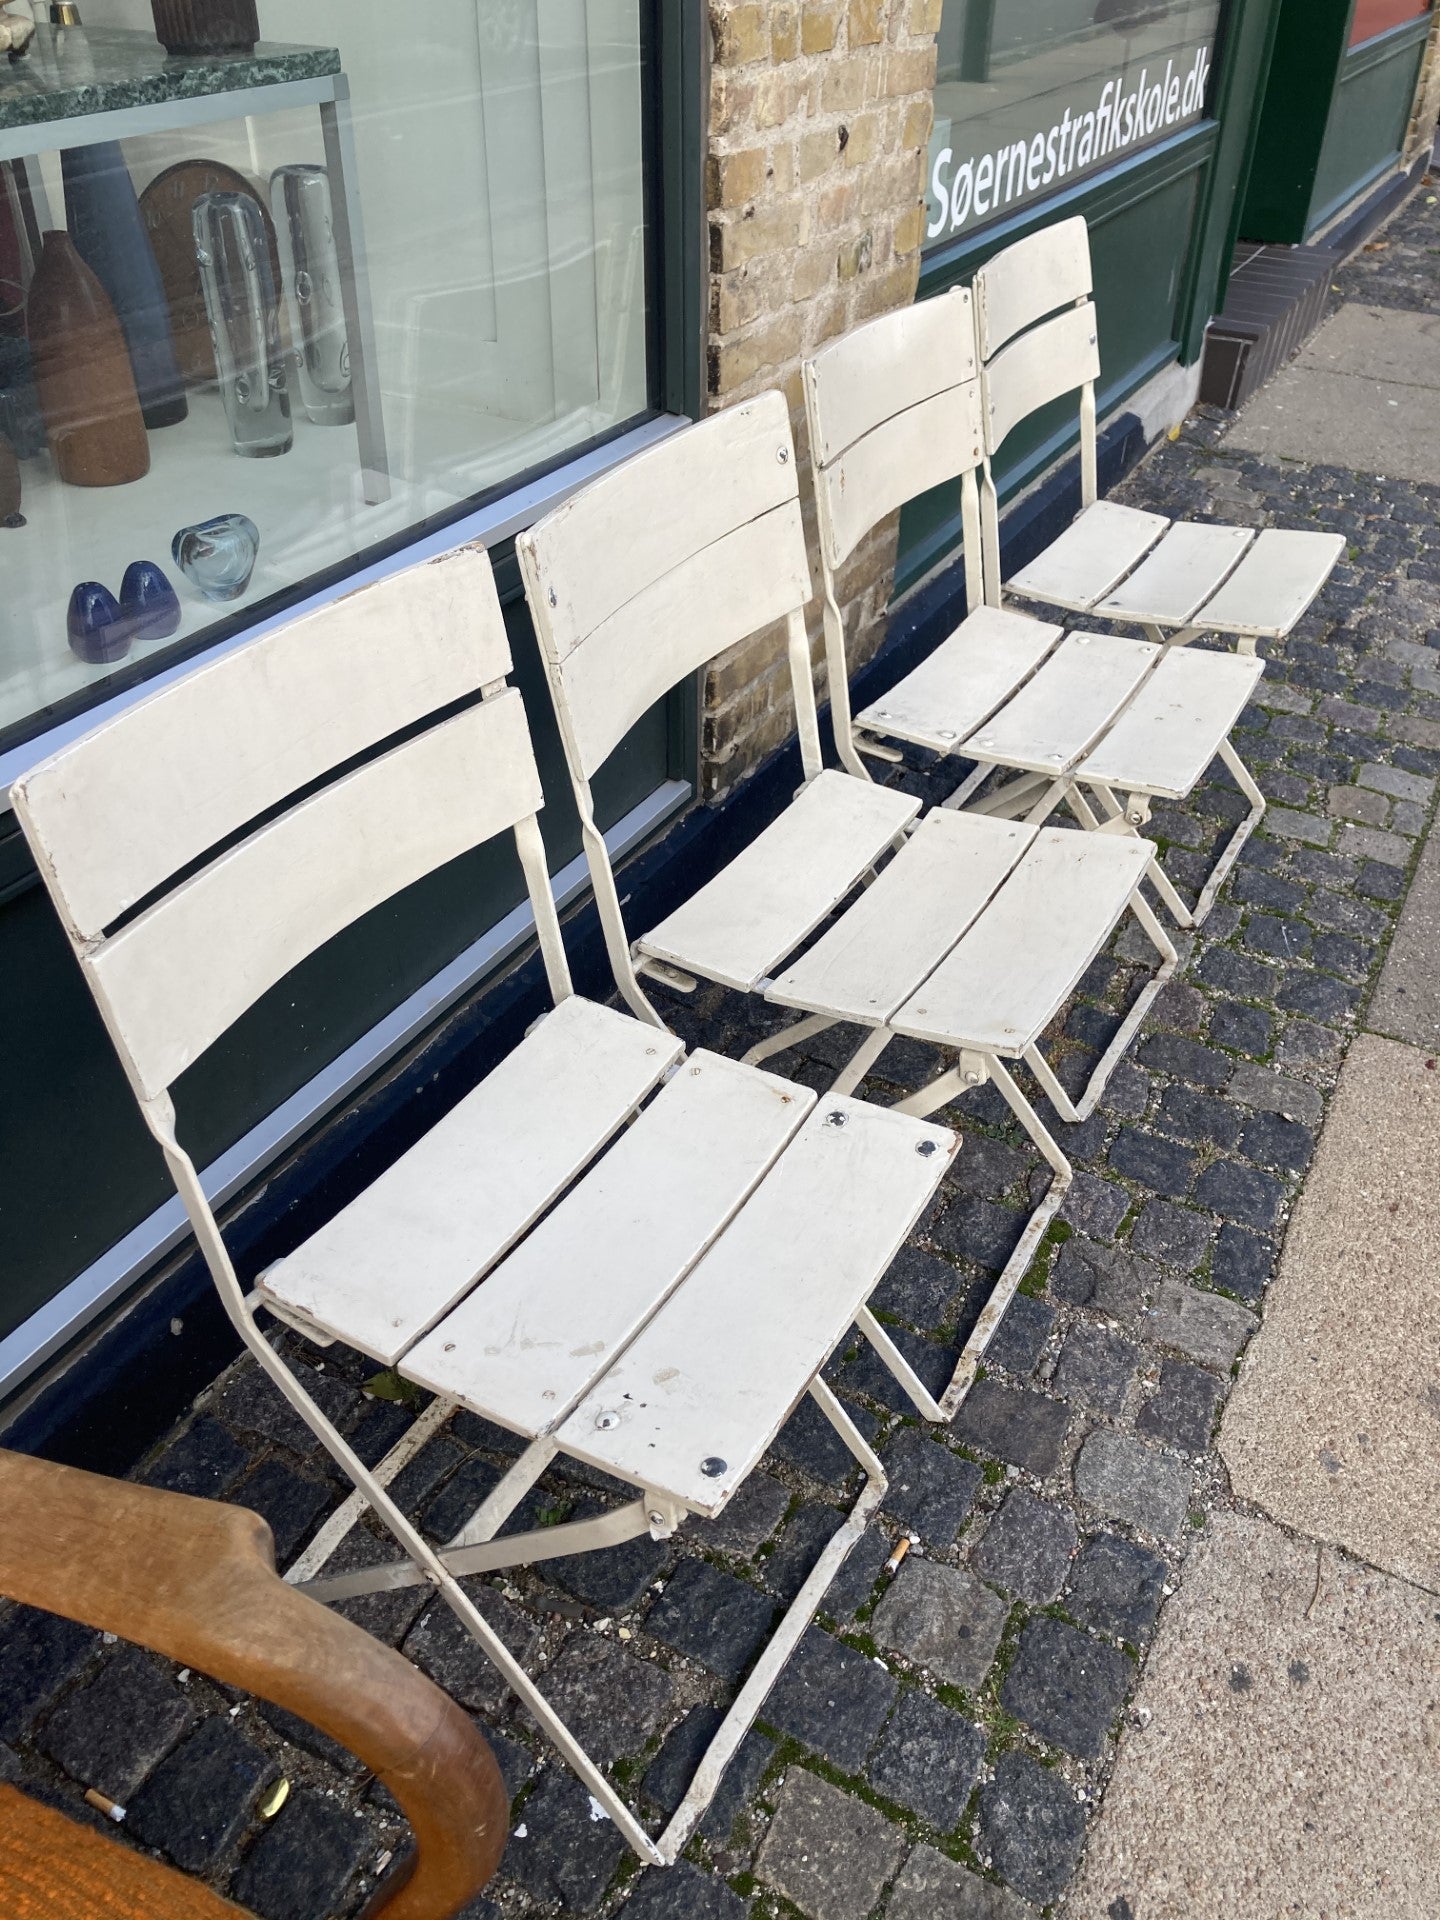 4 French café chairs, iron frame and wooden seat and back - no. 0999